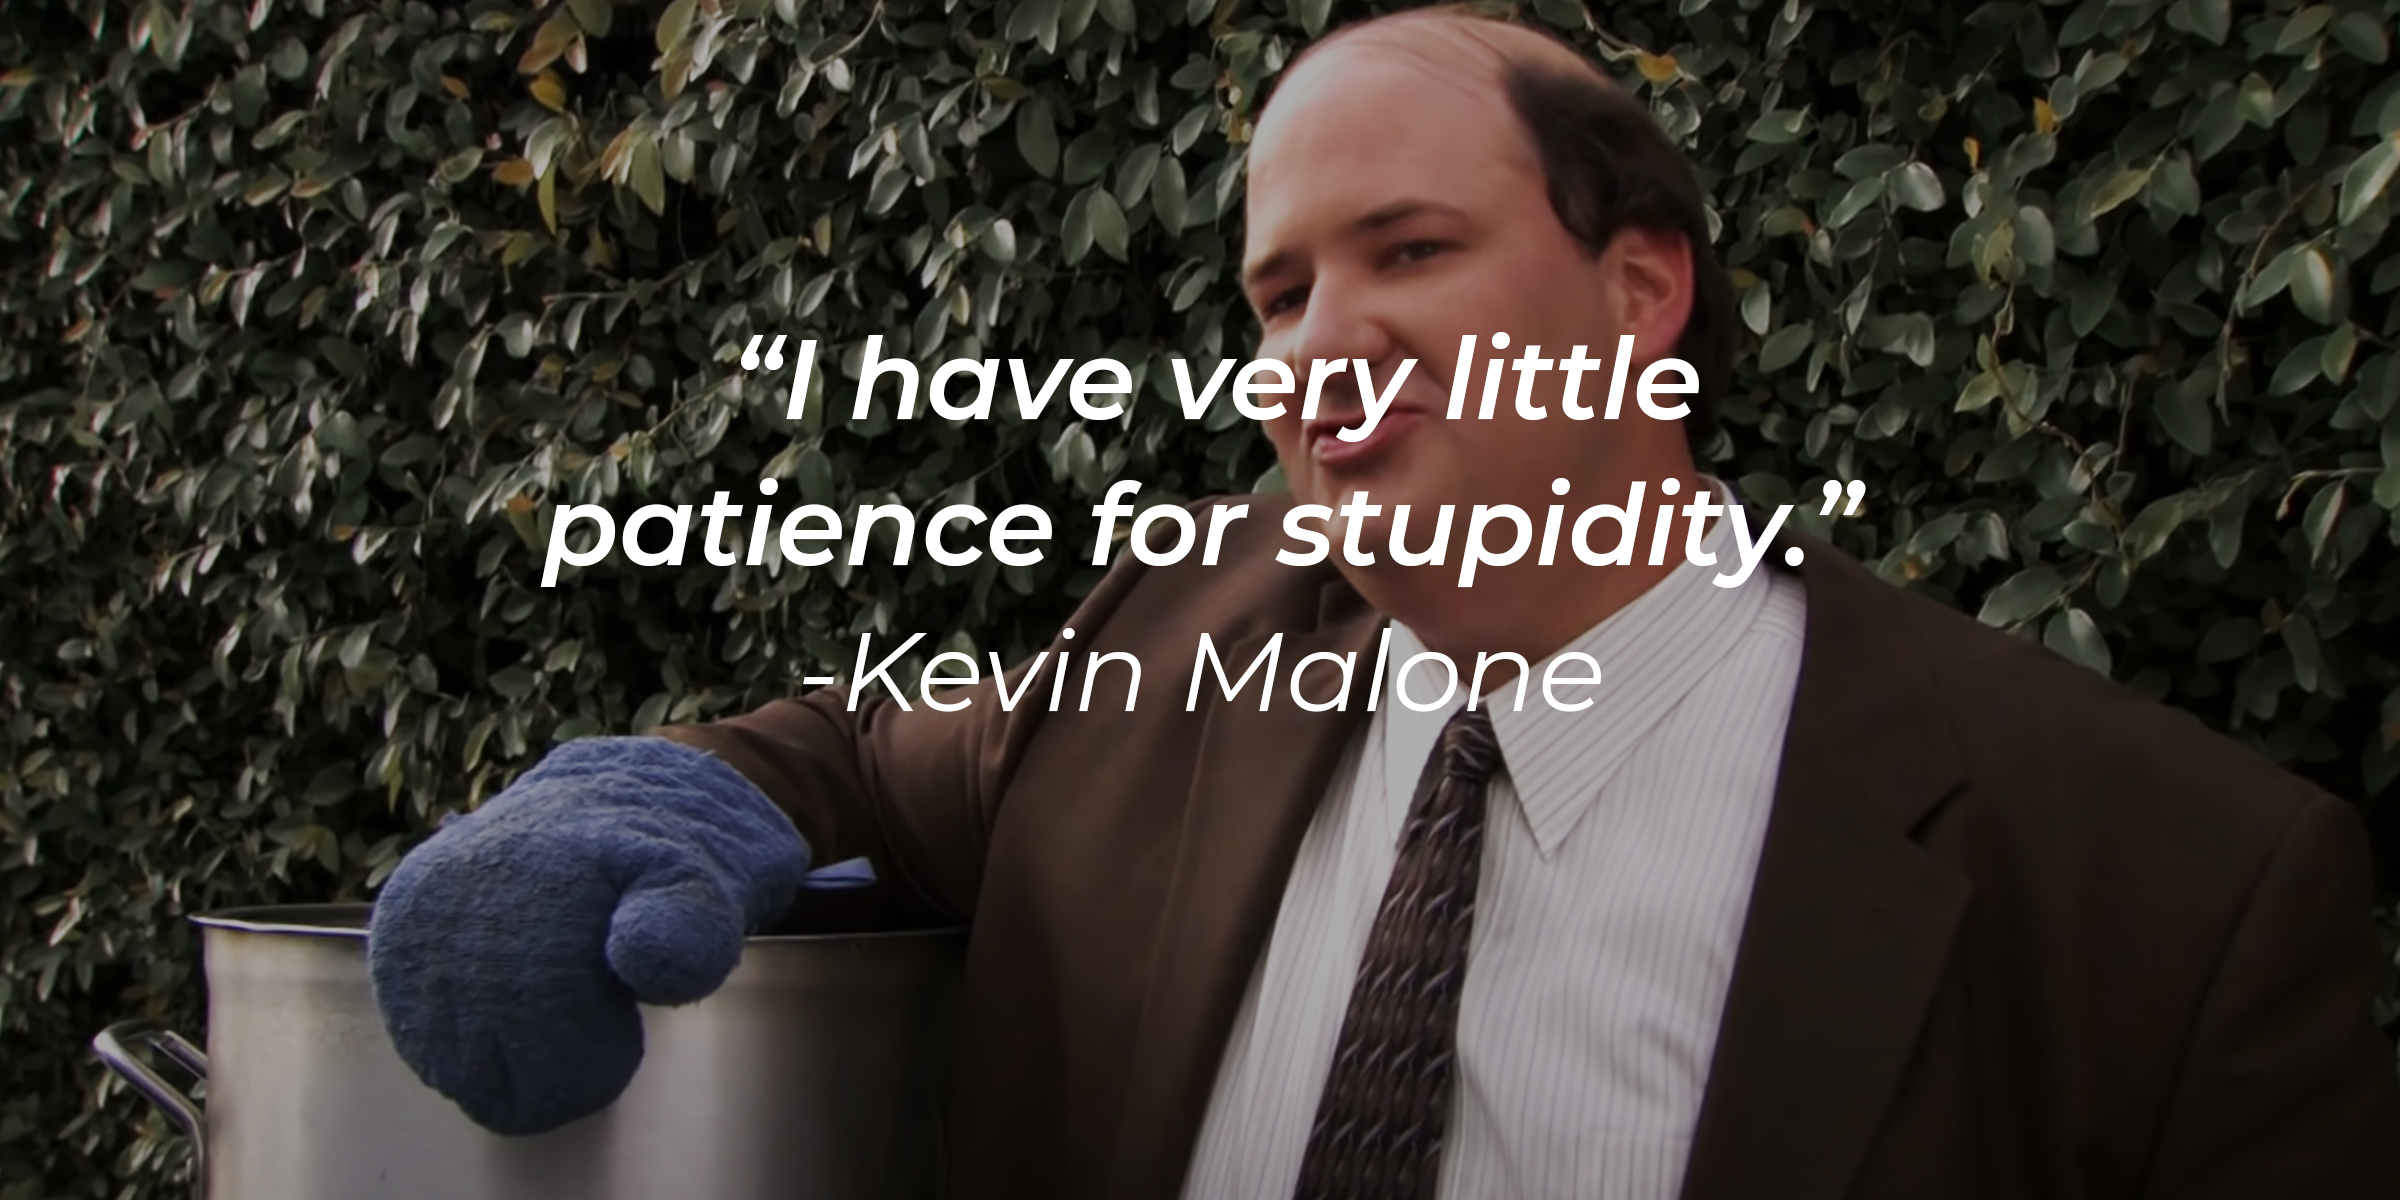 An image of Kevin Malone, with his quote: “I have very little patience for stupidity.” | Source: Youtube.com/The Office